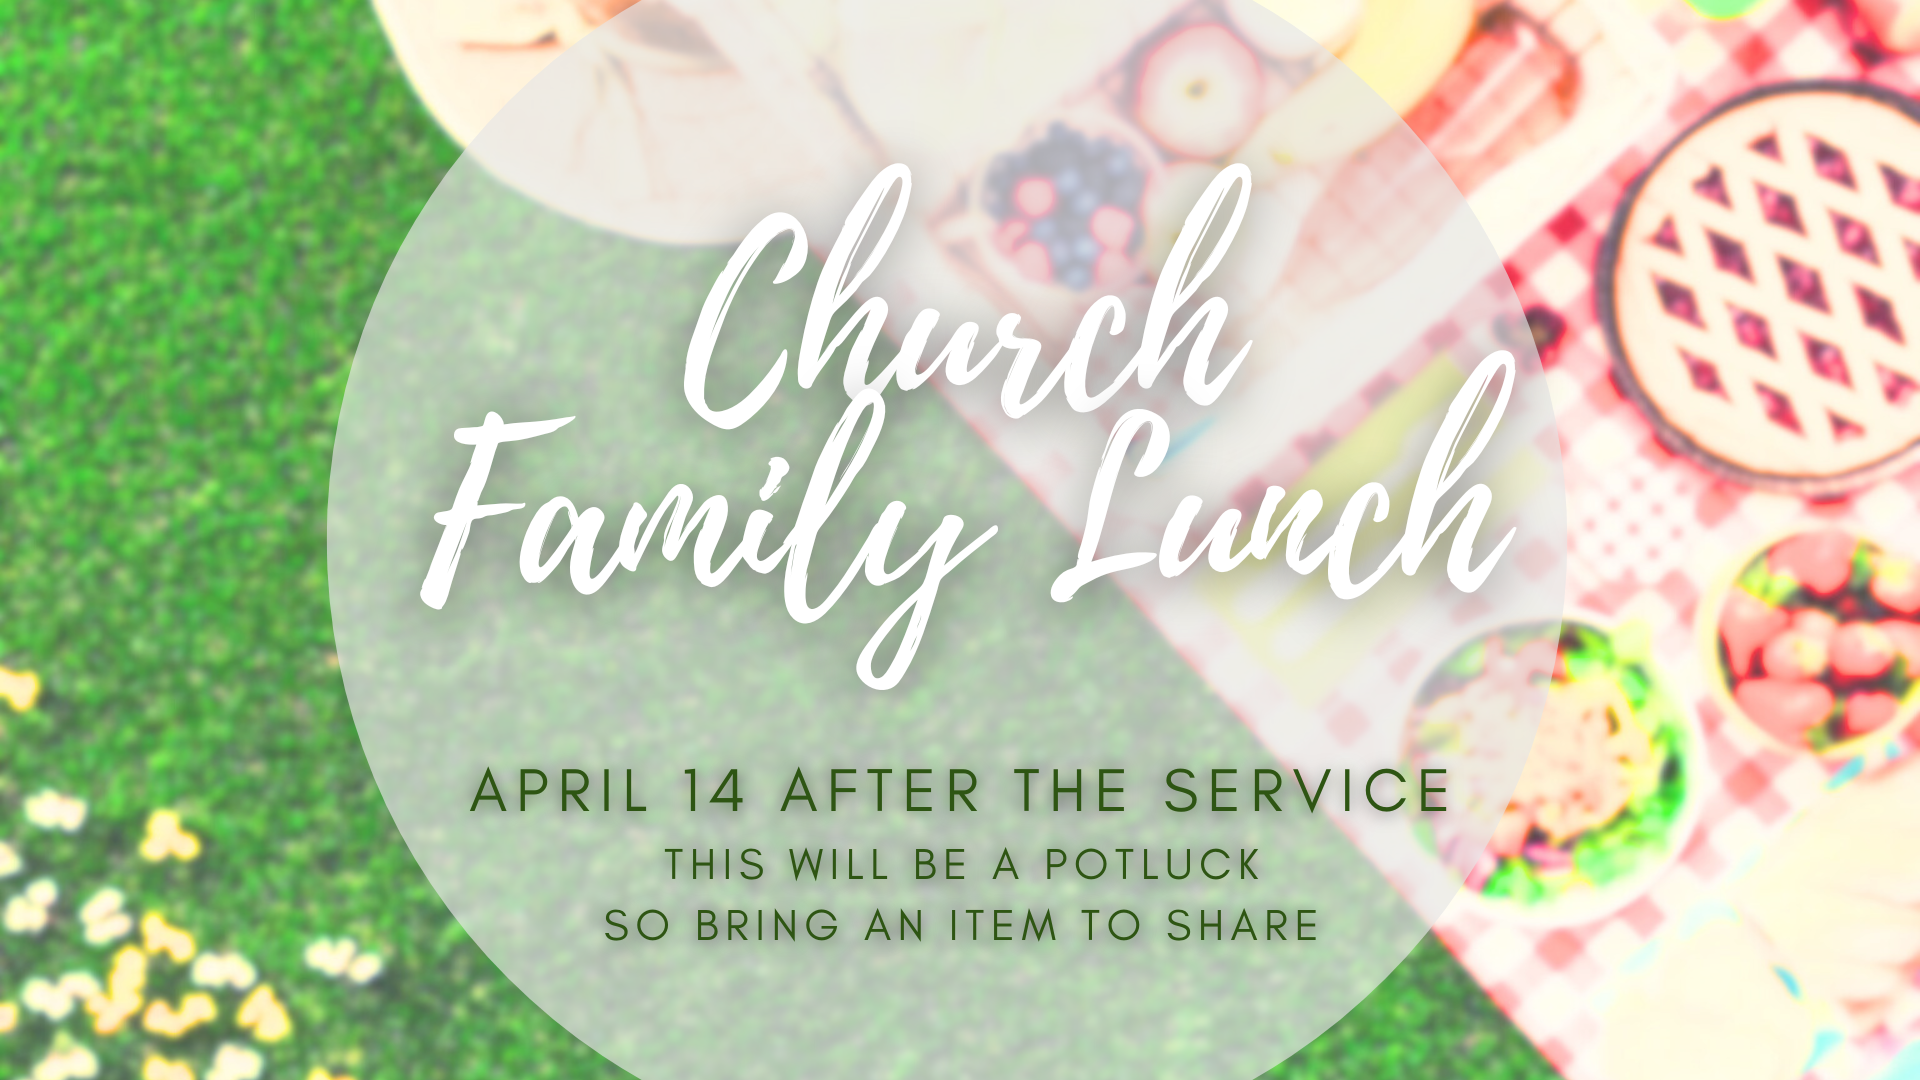 Church family lunch image